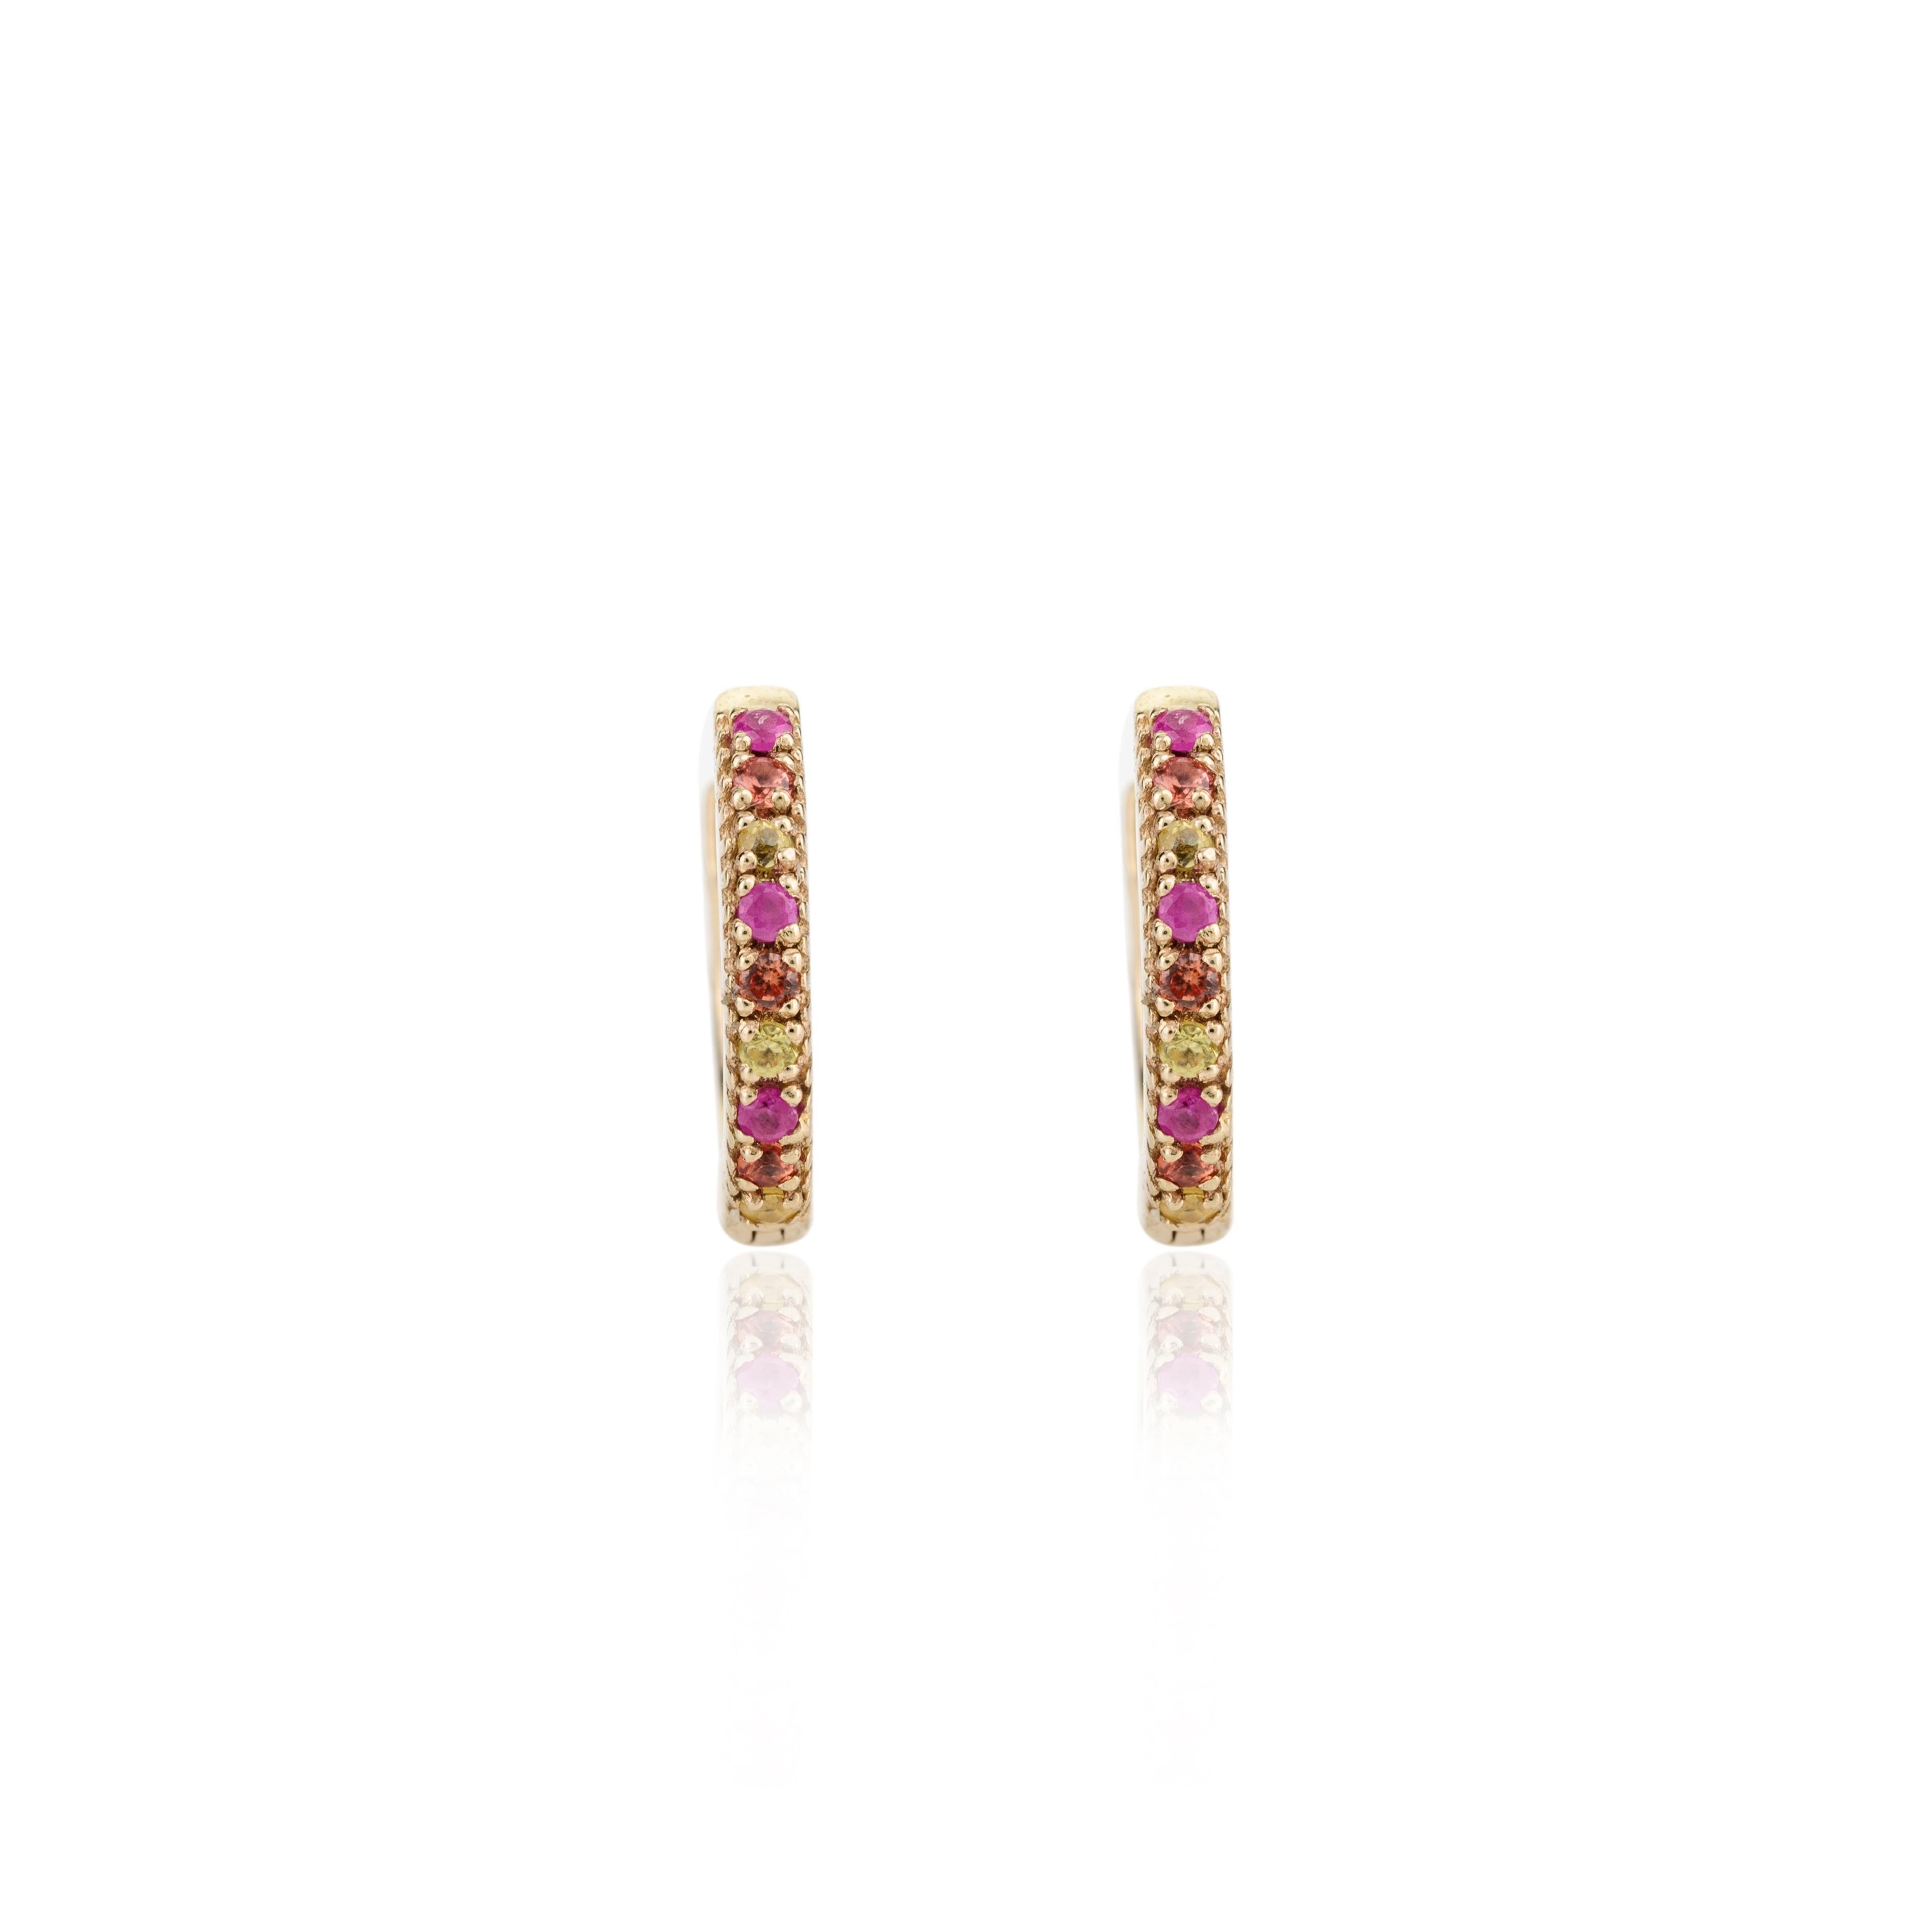 Tiny Multi Sapphire Everyday Huggie Hoop Earrings in 18K Gold to make a statement with your look. You shall need stud earrings to make a statement with your look. These earrings create a sparkling, luxurious look featuring round cut multi